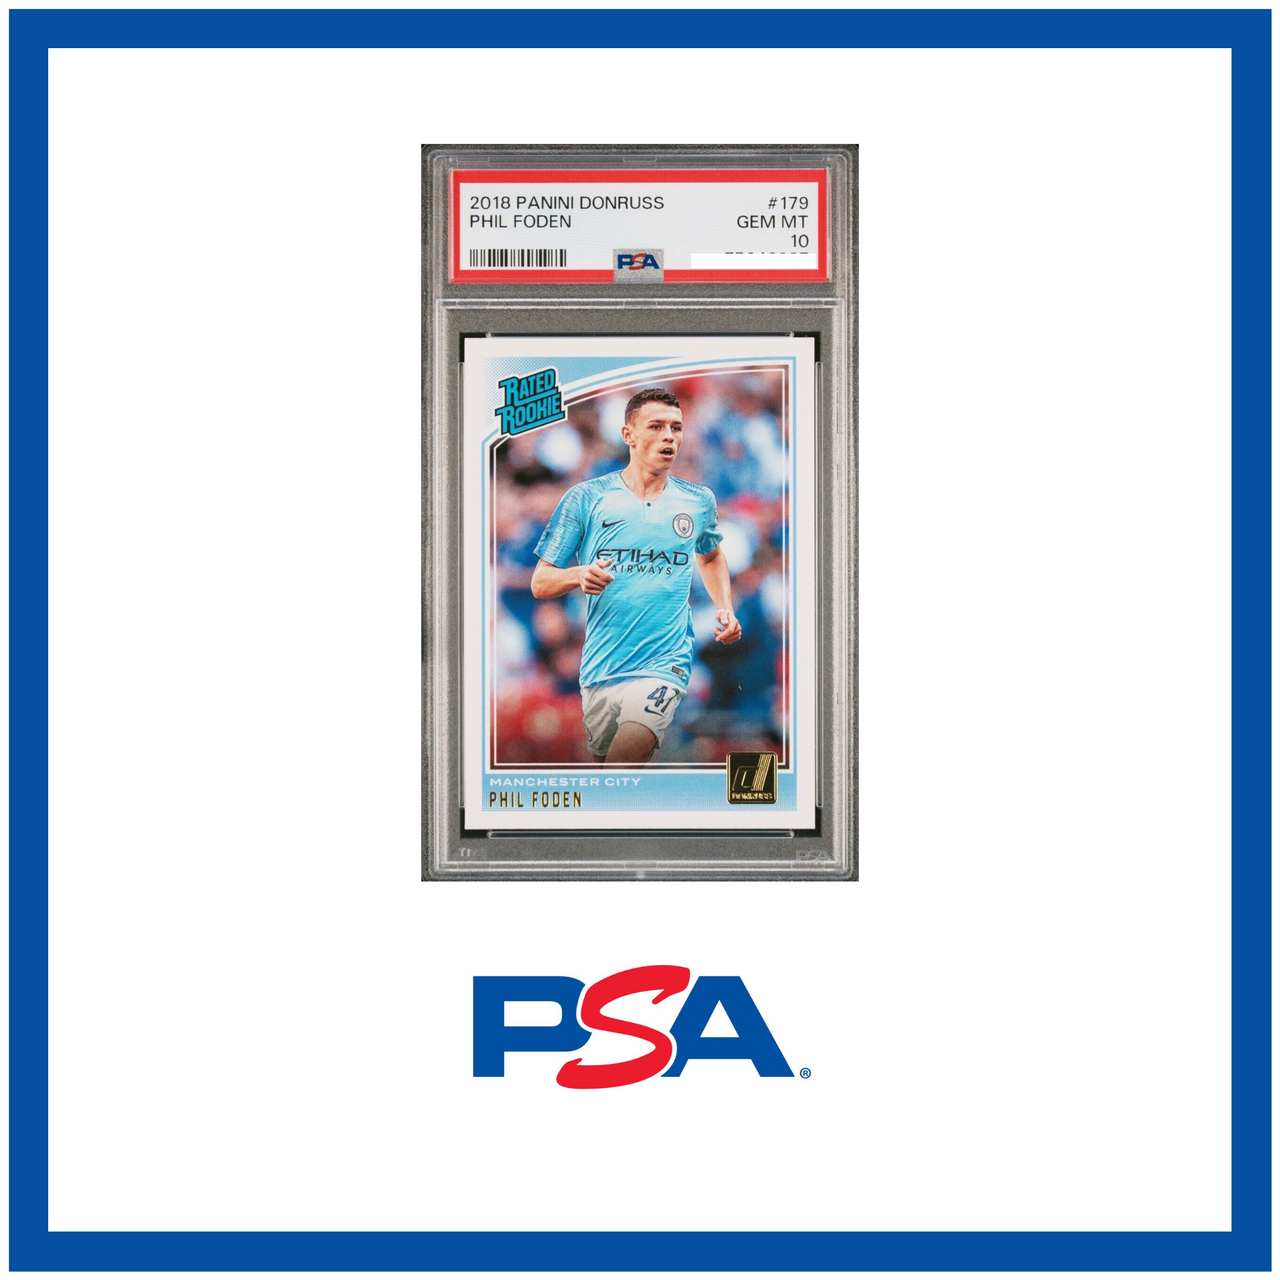 2018-19 Donruss Phil Foden Rated Rookie Card PSA 10  Man City RC